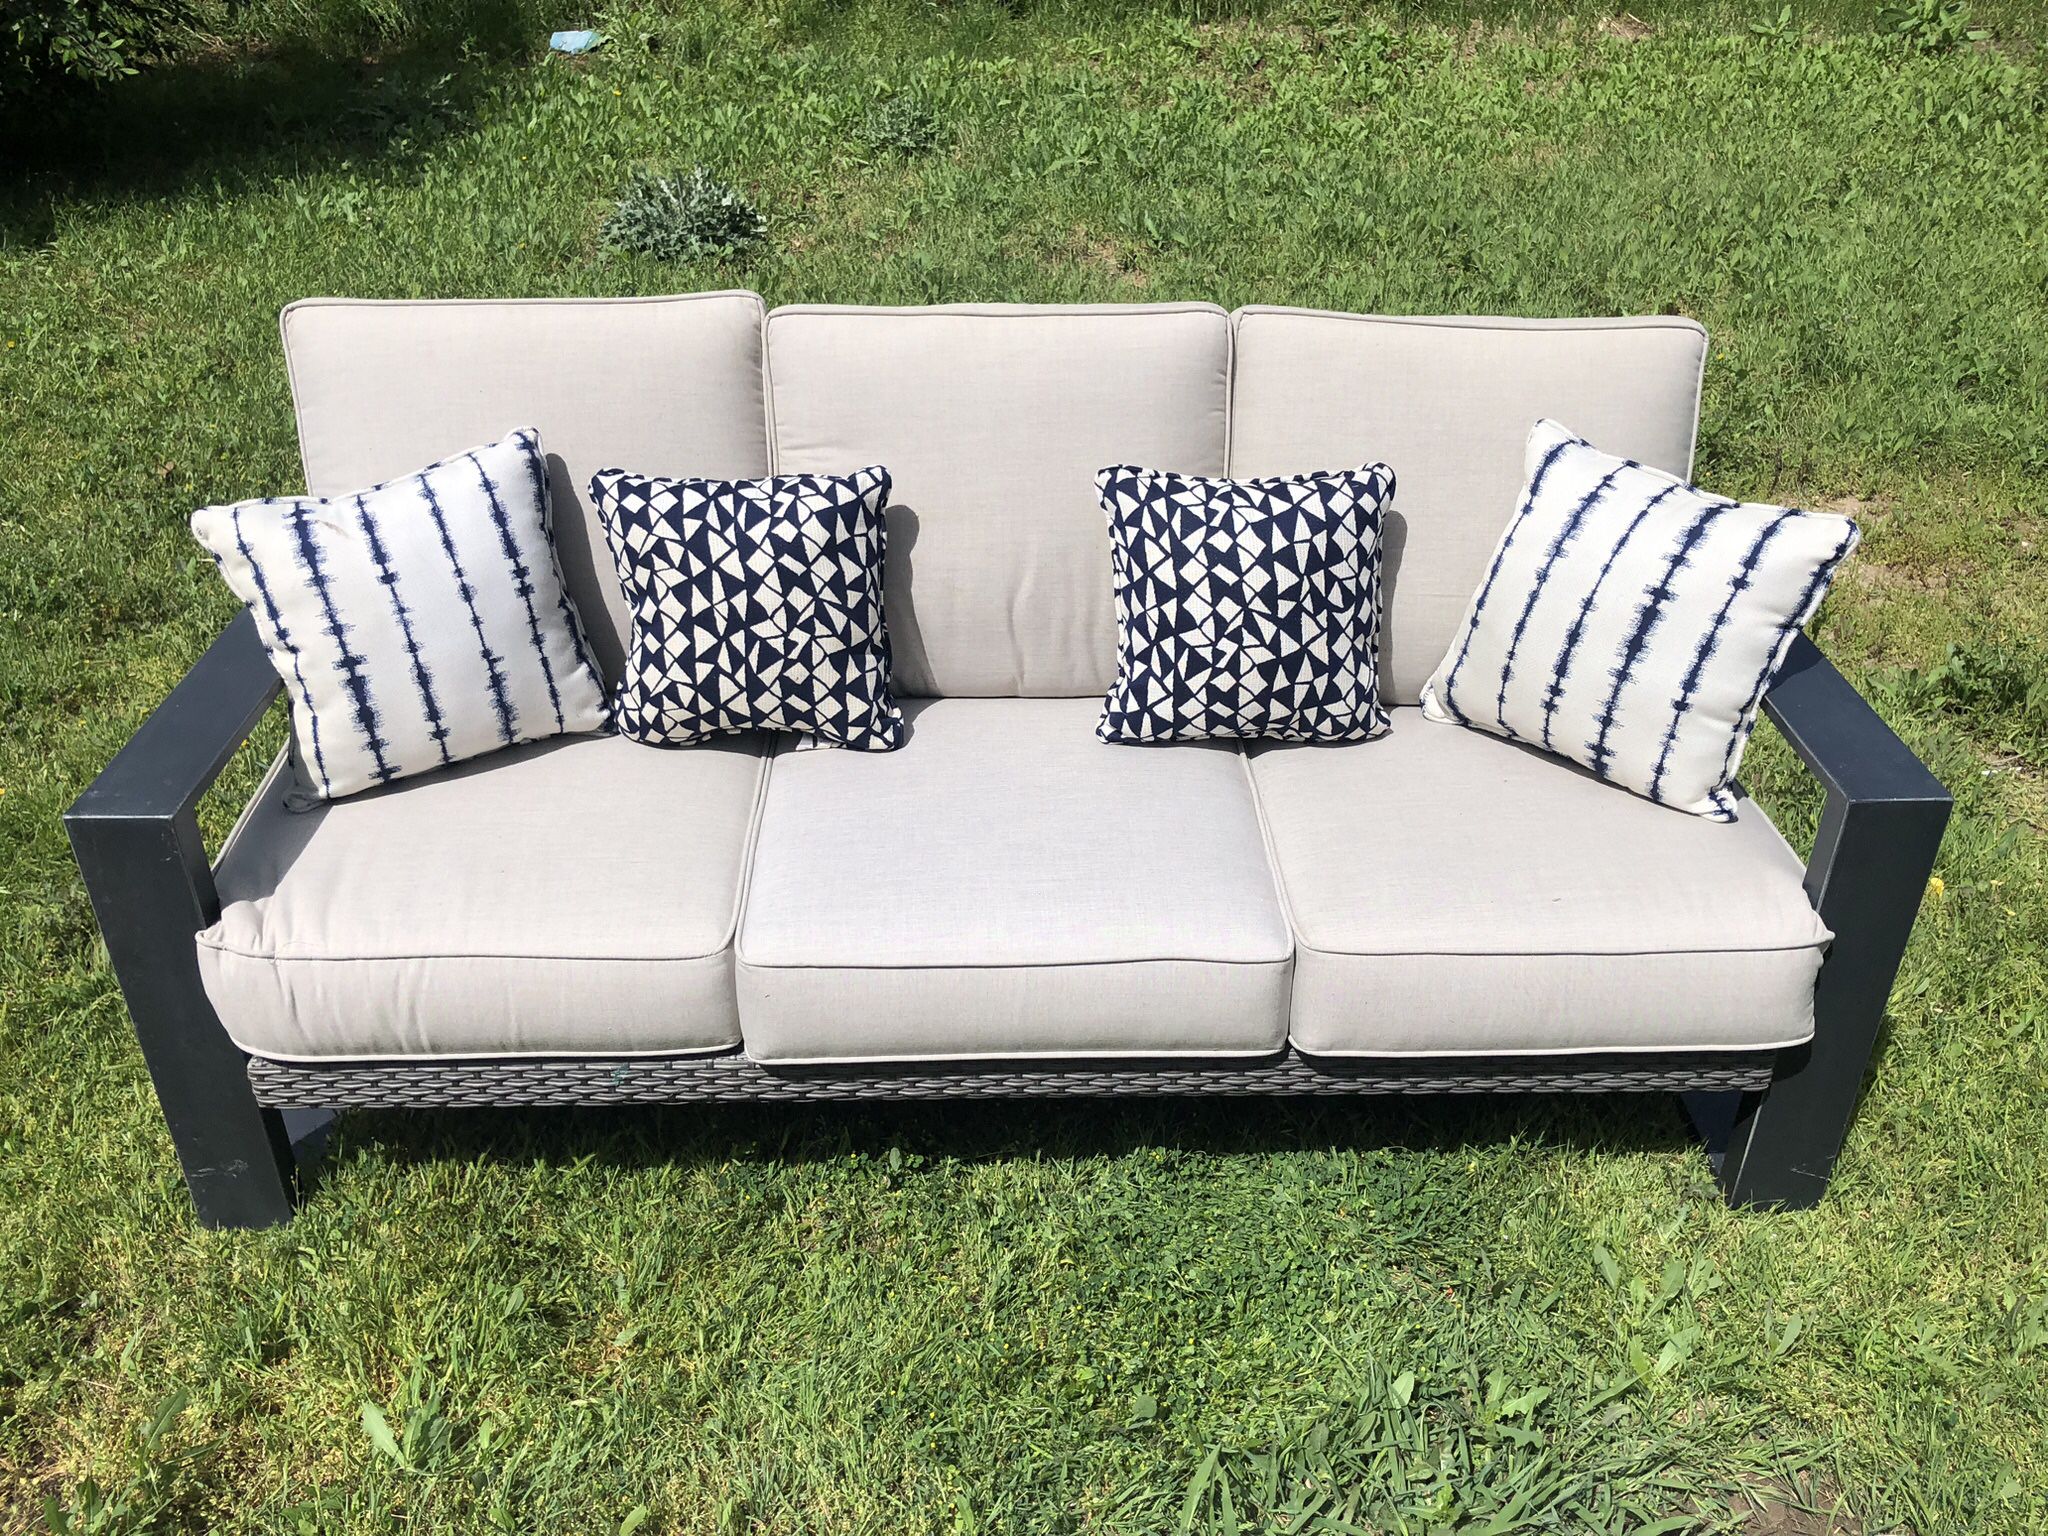 Outdoor Bench With Cushions- Garage Stored